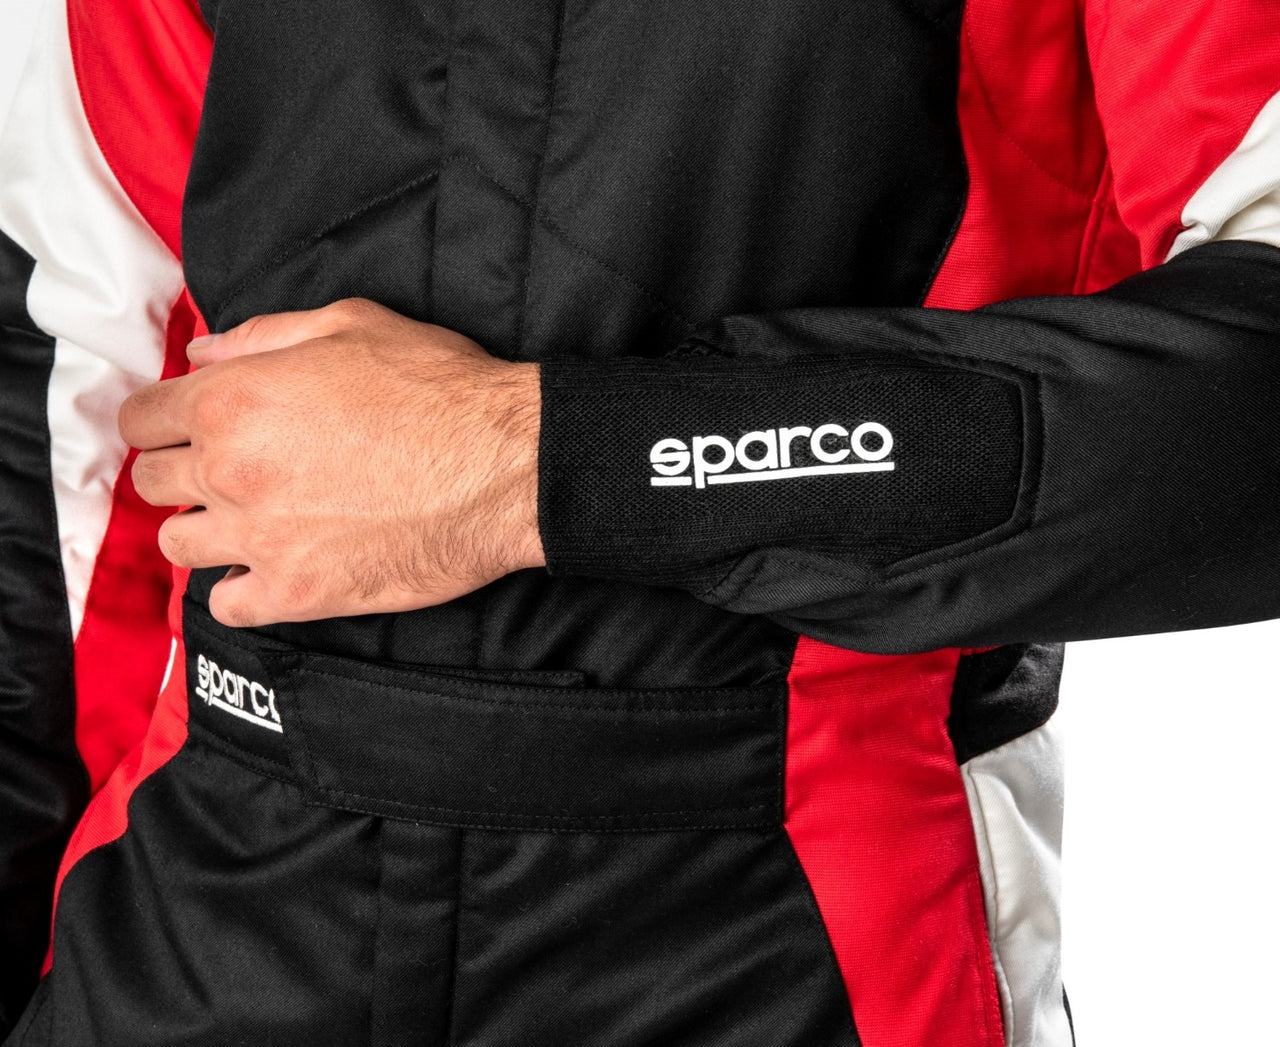 Sparco Competition Race Suit Black / Red Sleve Image